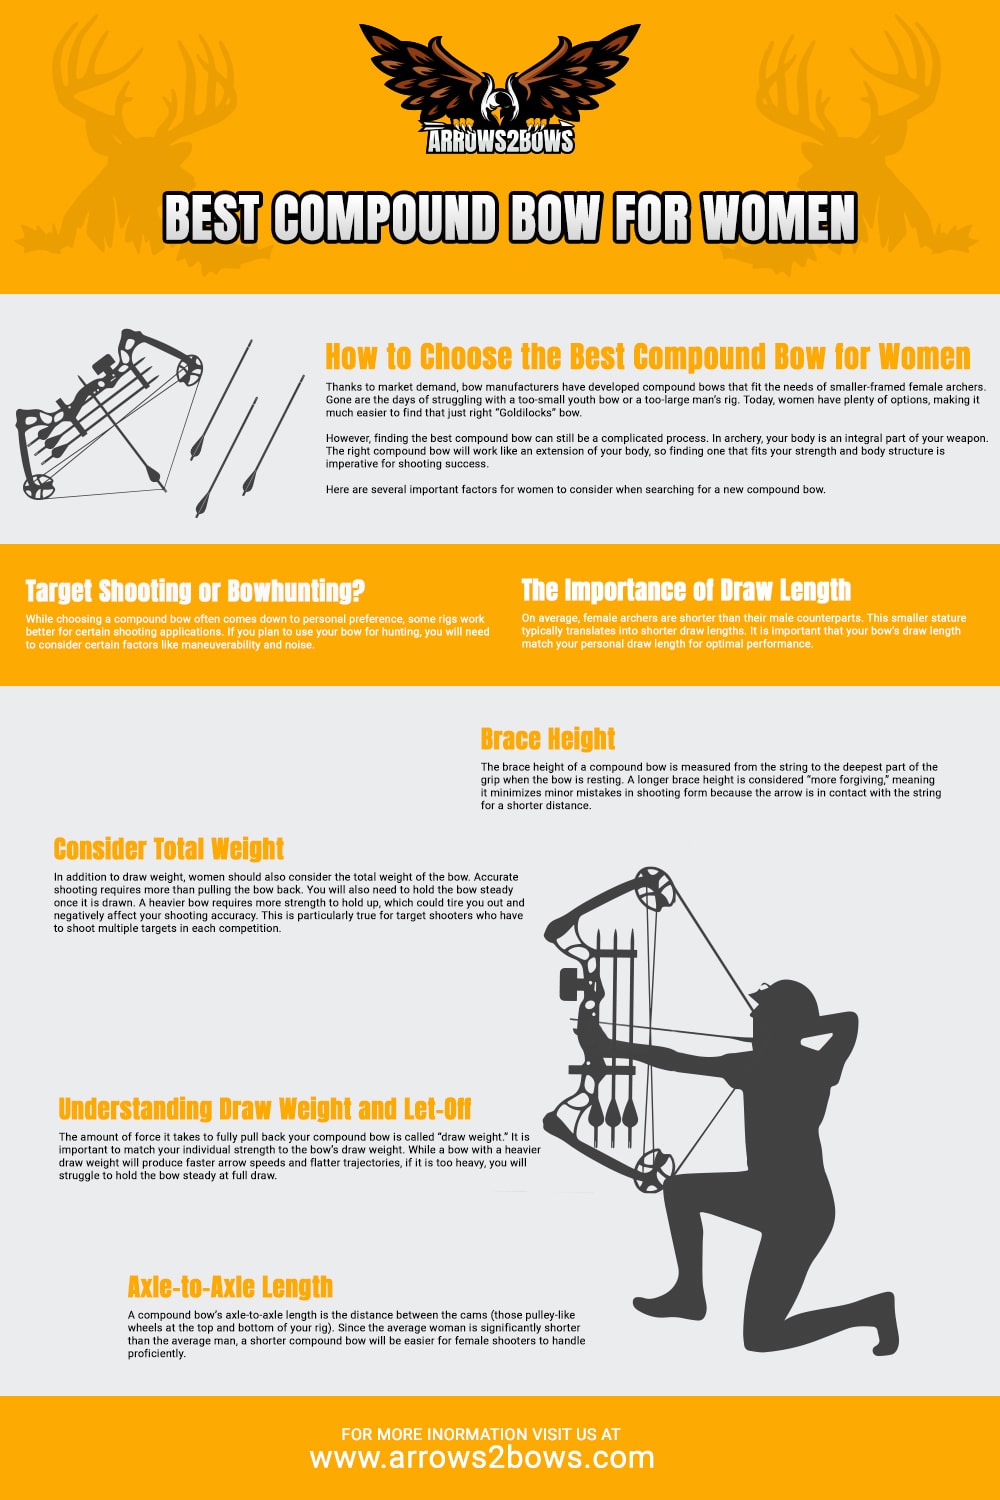 Best compound bow for women - How to choose the bow